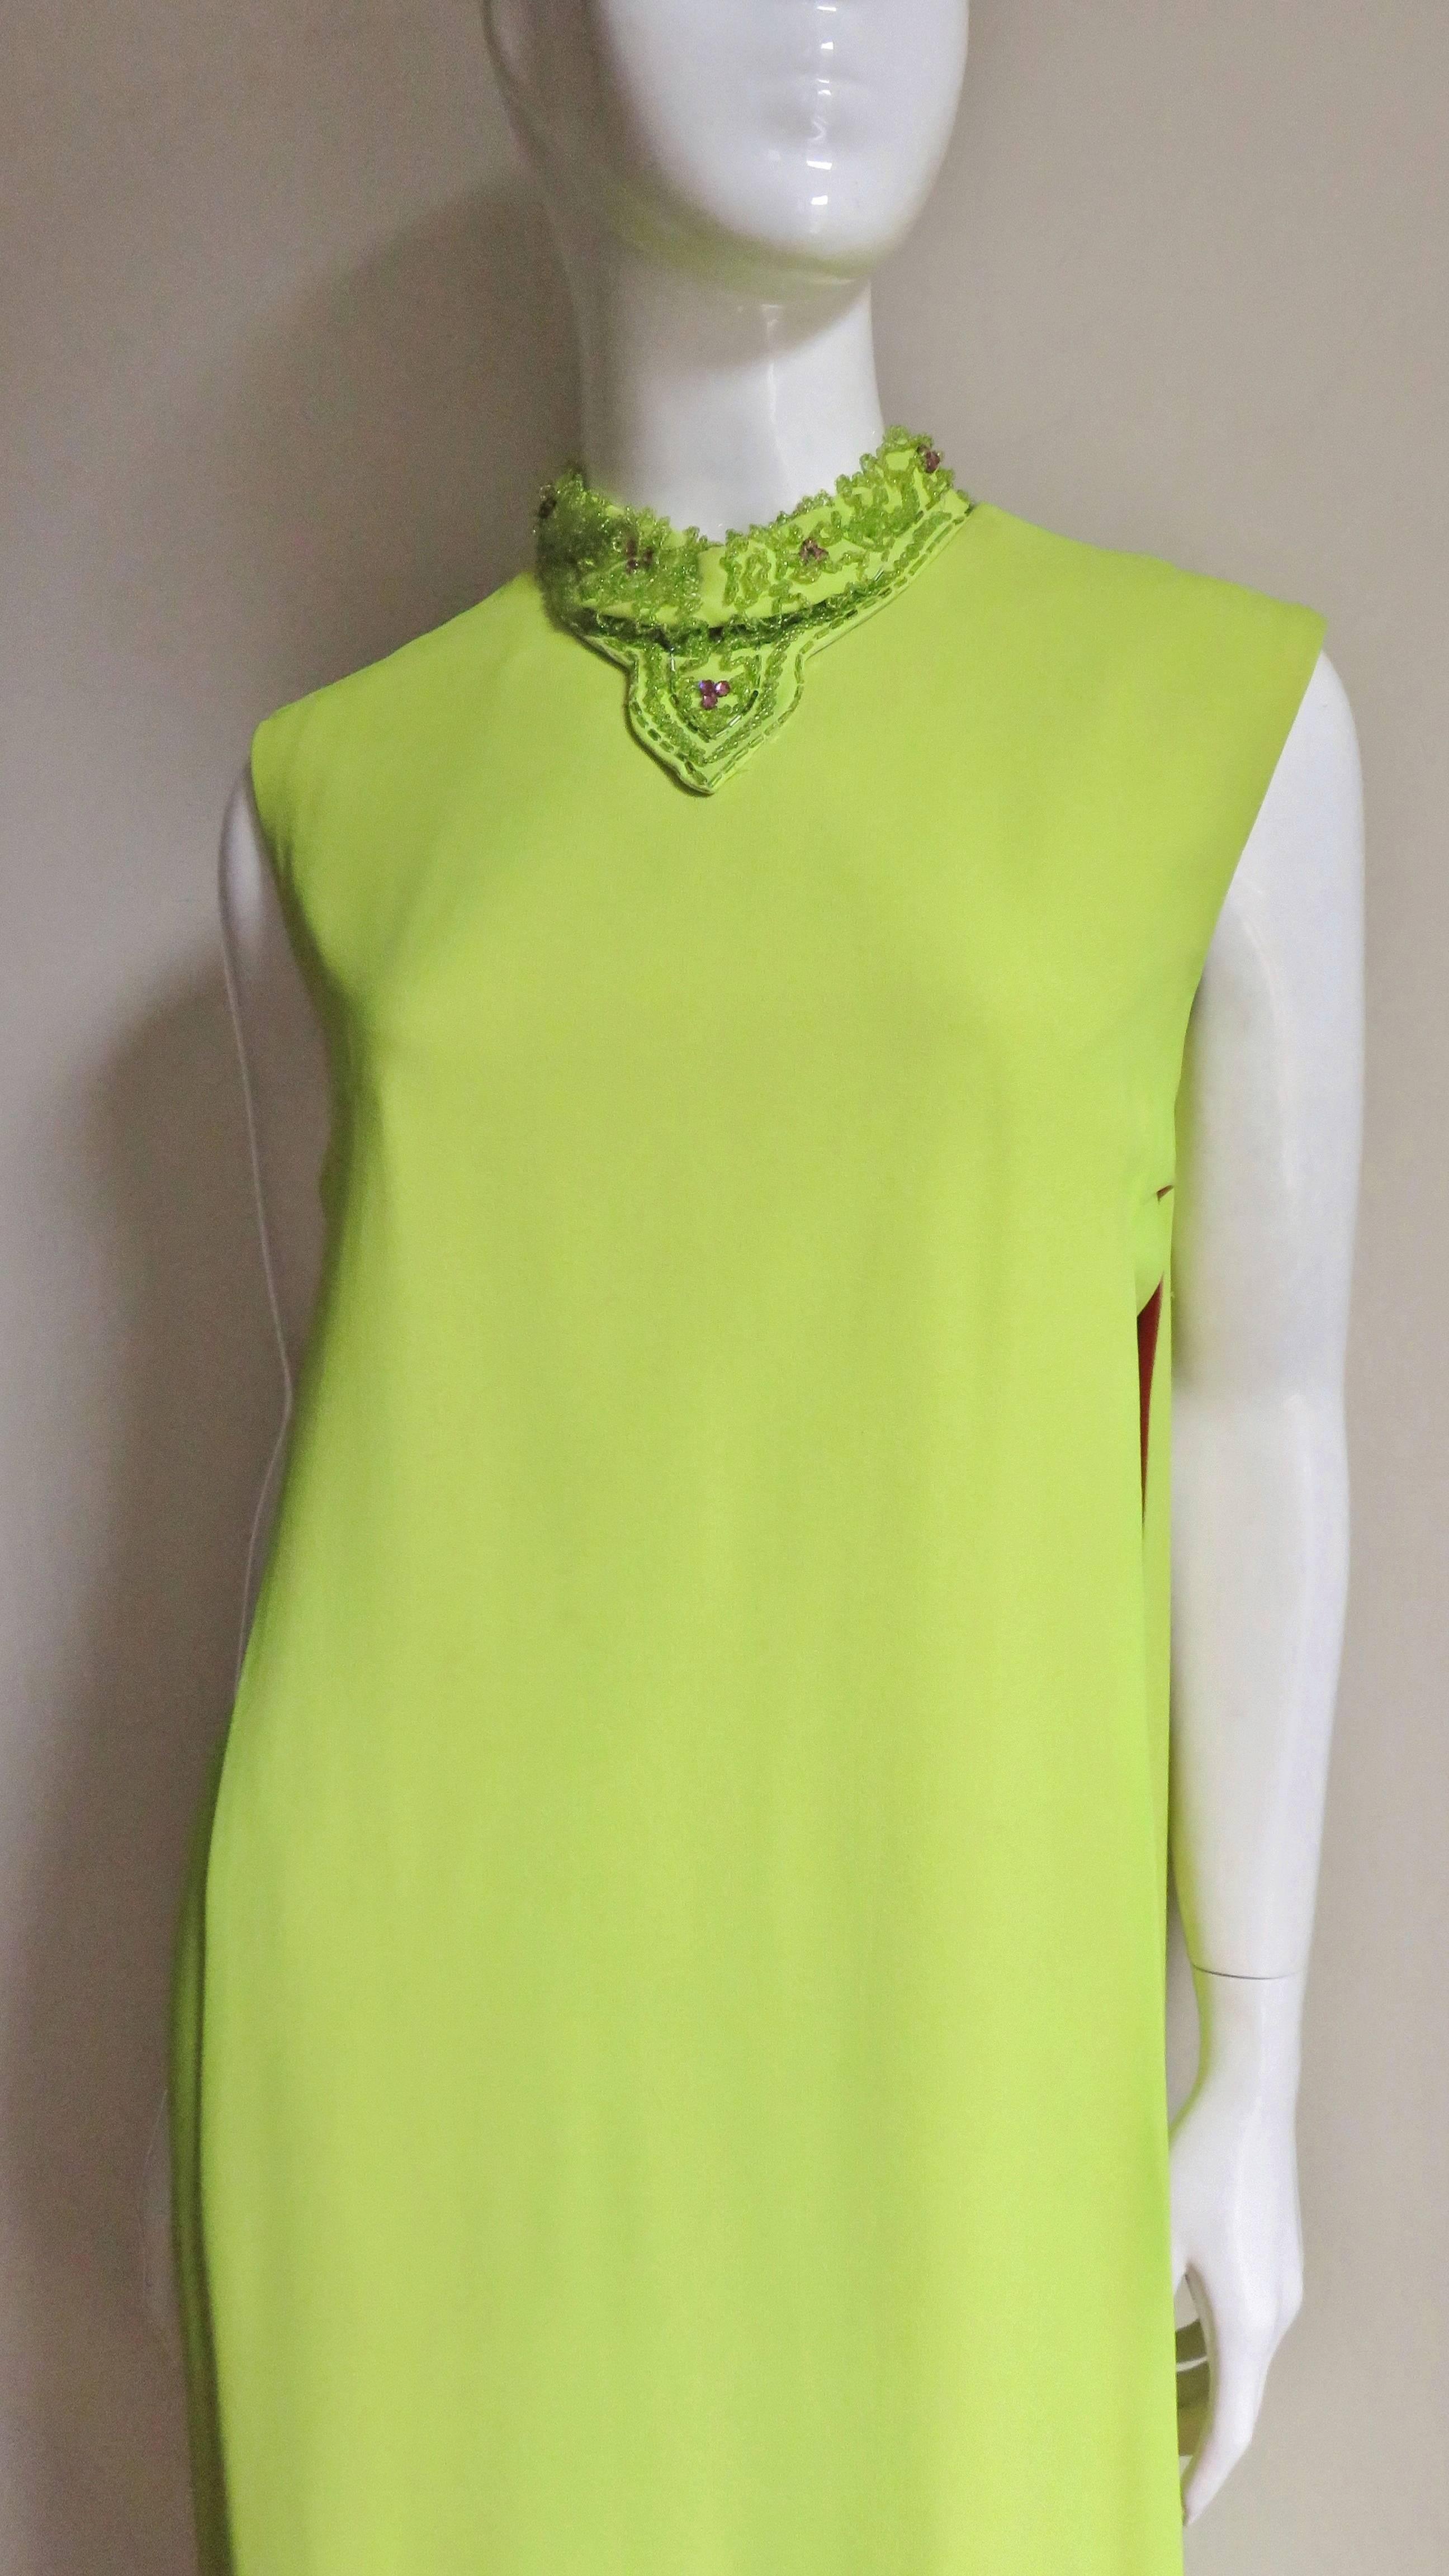 A fabulous maxi dress in bright yellow green and pink from Junior Vogue.  It is a semi fitted long sheath under a matching tabard overdress flashing the pink underneath it as it moves. The collar is highlighted with matching green glass beads and